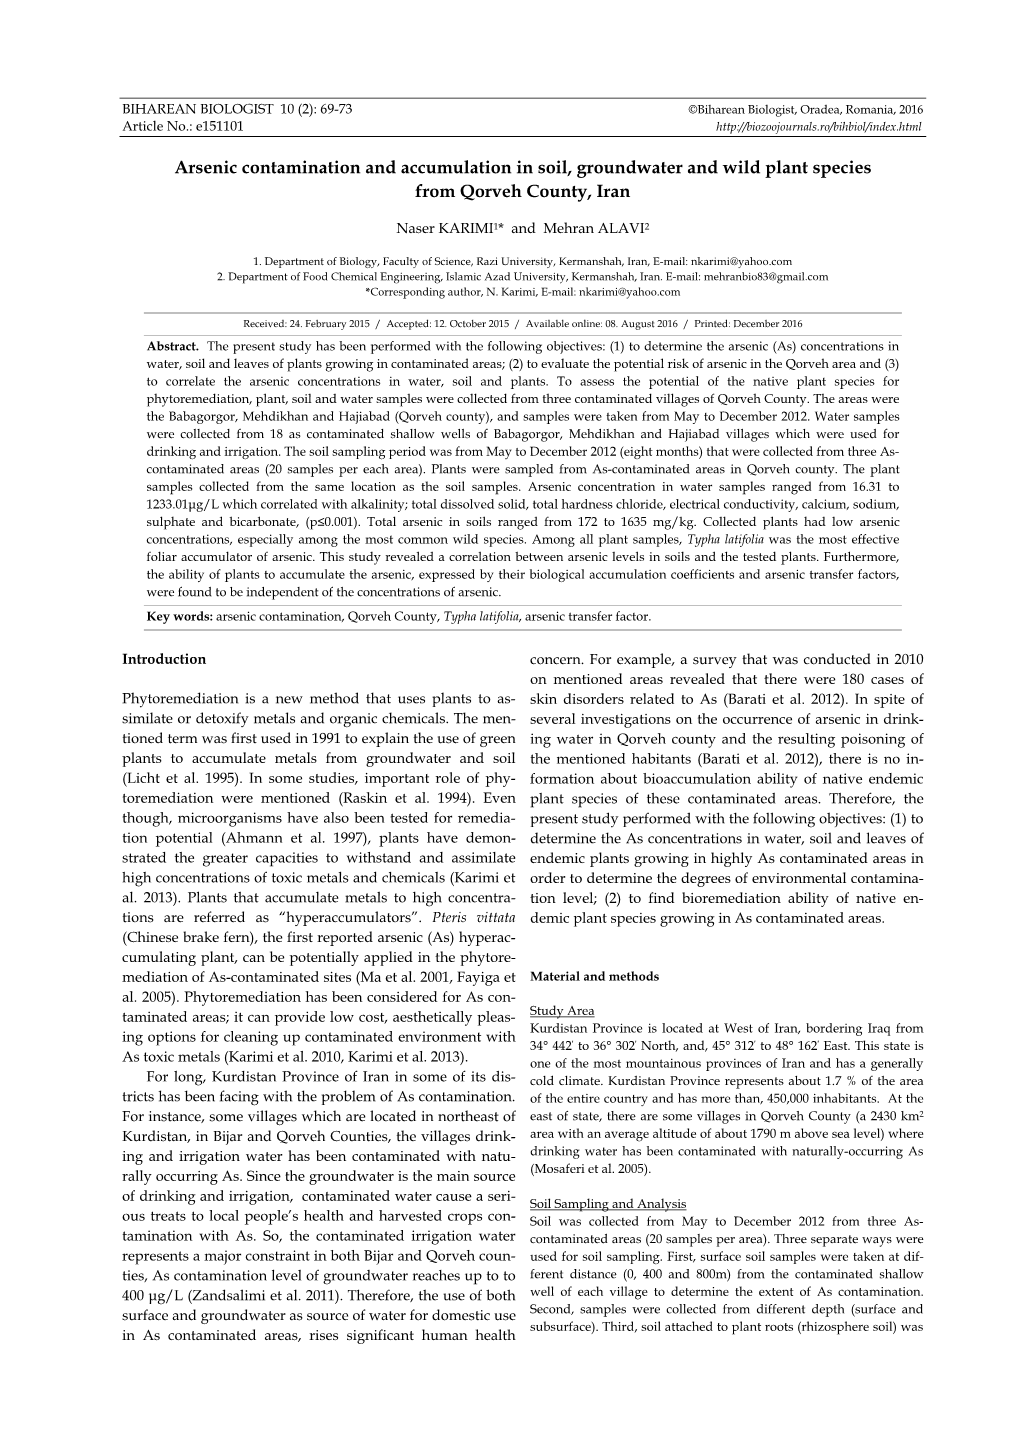 Arsenic Contamination and Accumulation in Soil, Groundwater and Wild Plant Species from Qorveh County, Iran